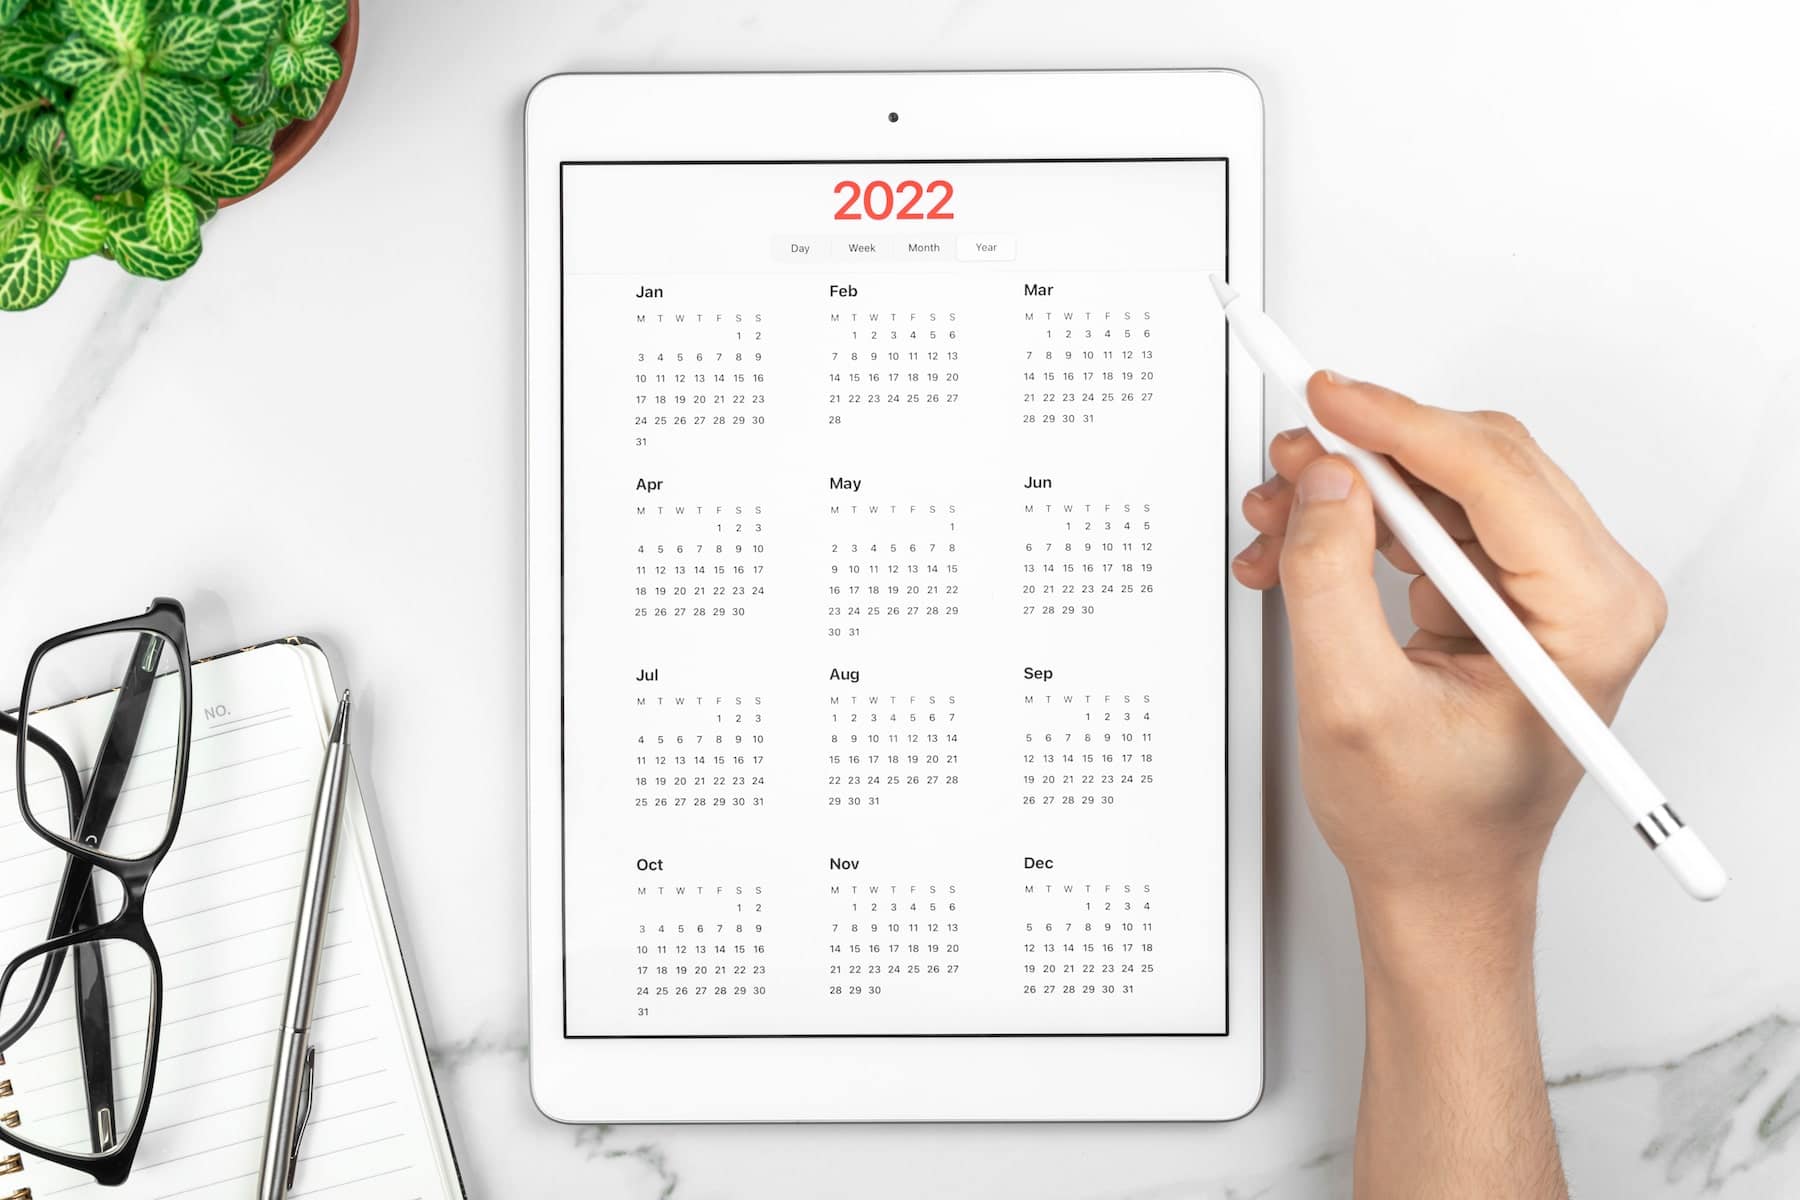 calendar 2022 reminder management concept tablet computer with open app white marble background business desktop goals planning new year concept top view flat lay photo min